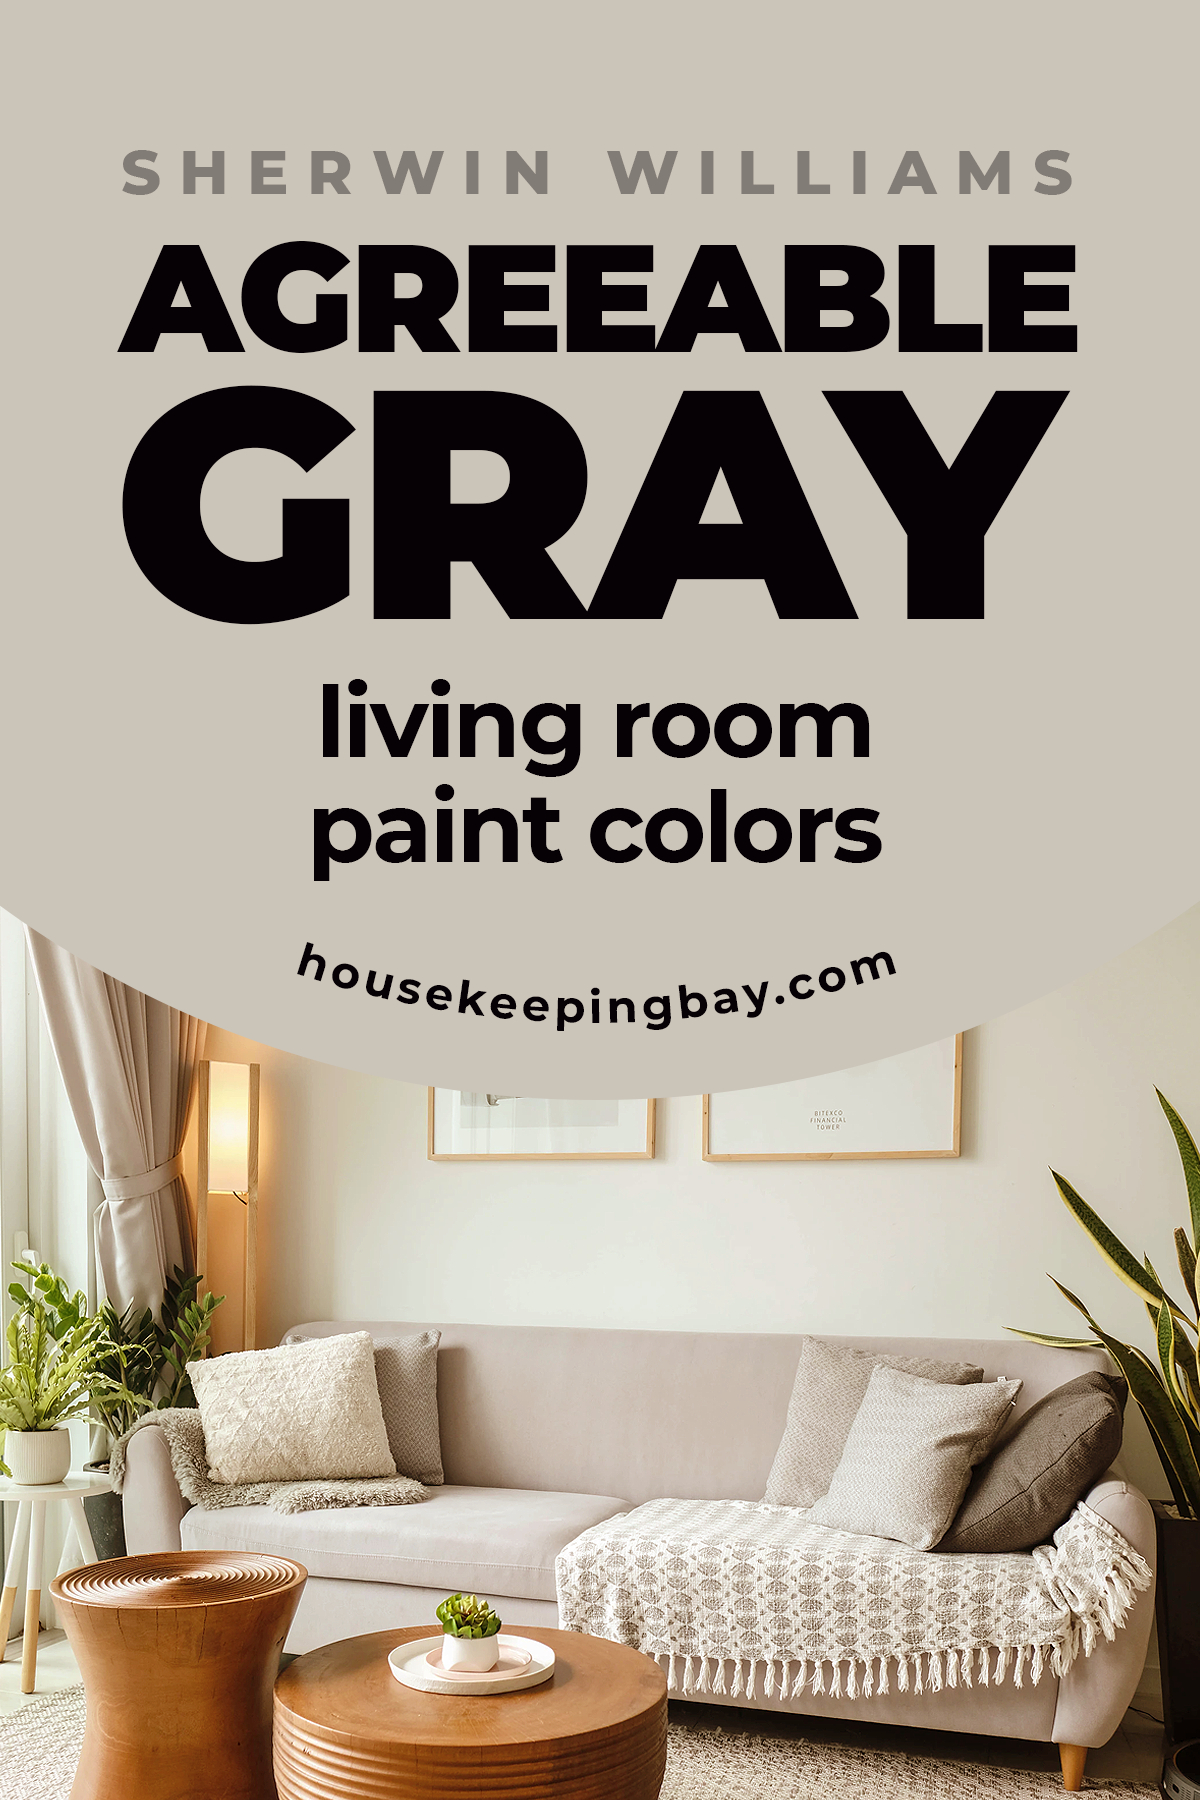 Agreeable Gray living room paint colors